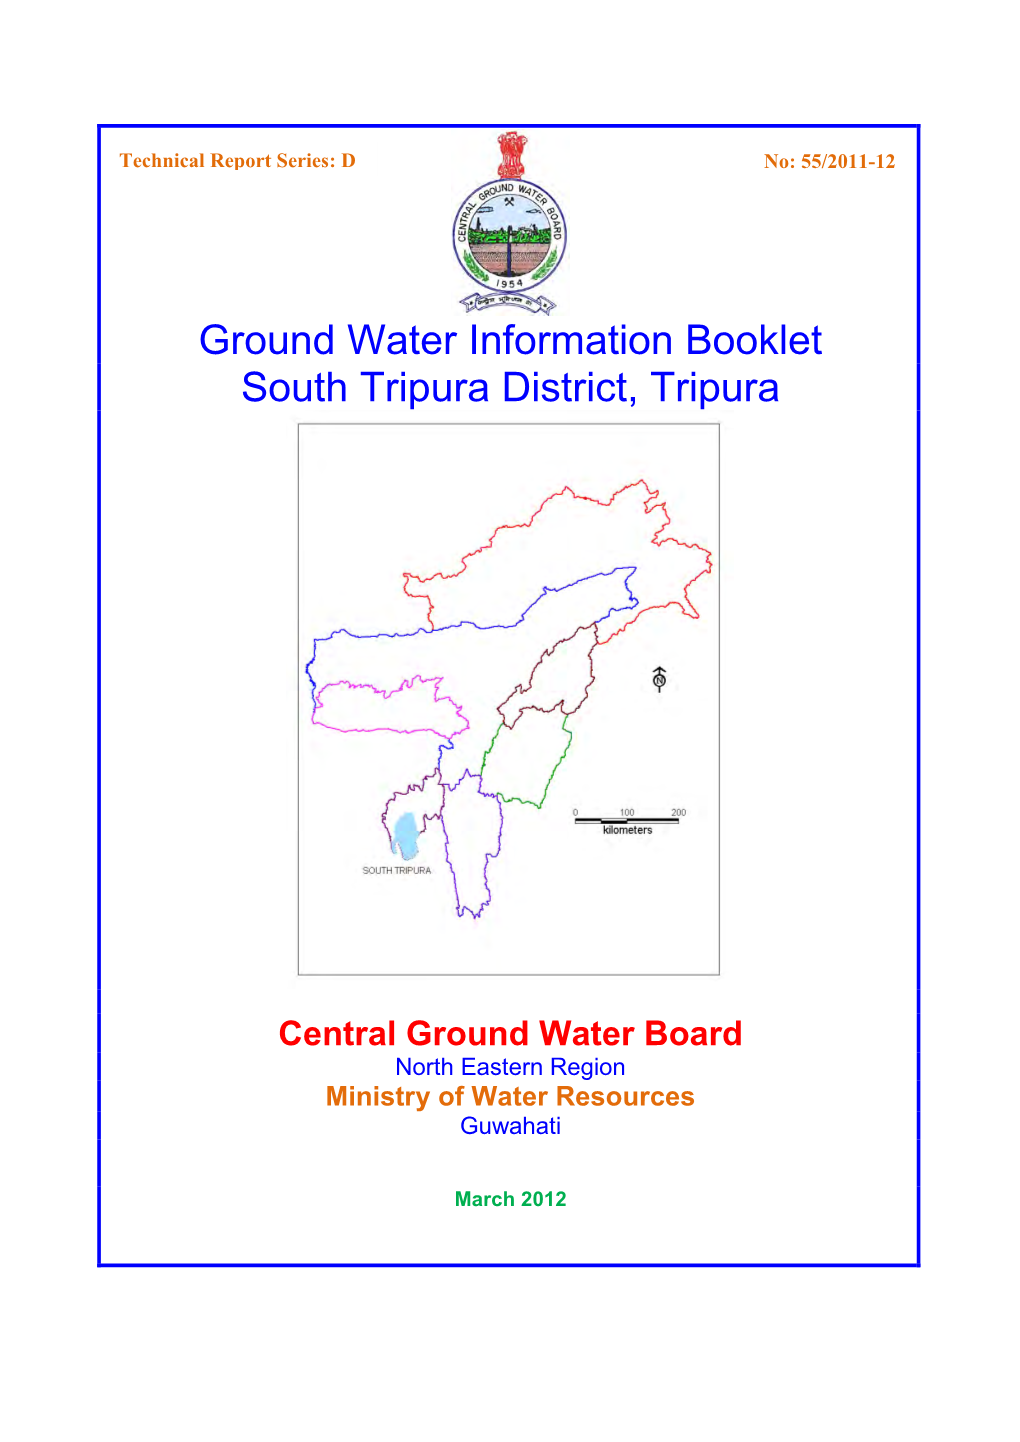 Ground Water Information Booklet South Tripura District, Tripura